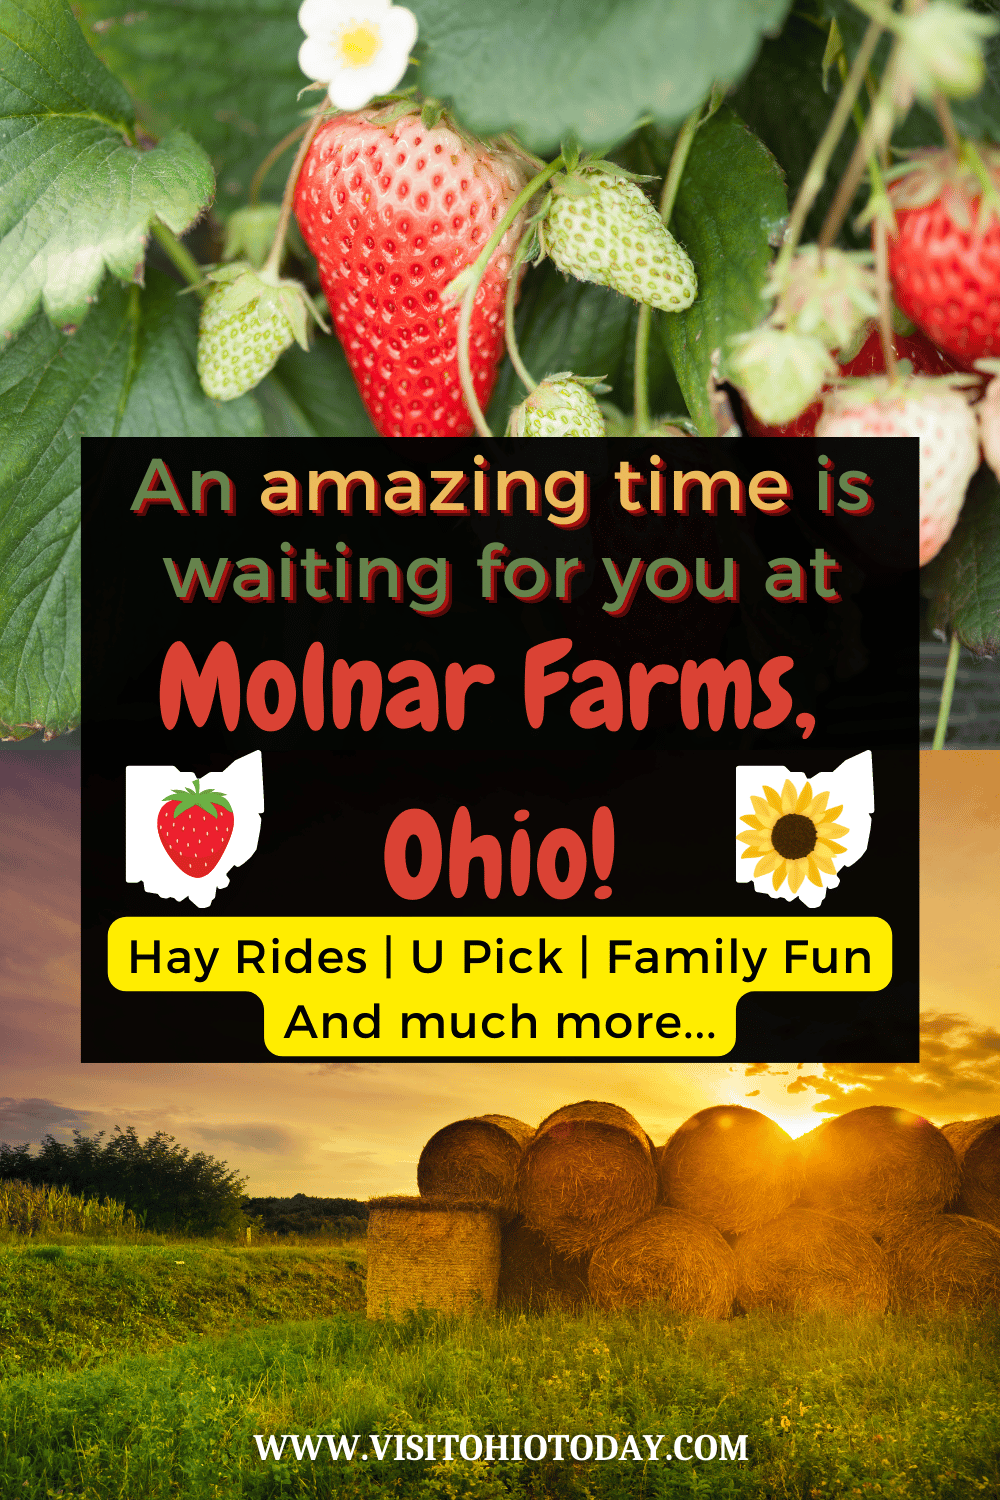 A vertical photo containing two images. At the top is strawberries growing on a vine and underneath is a pile of hay bales in a field. Text overlay says an amazing time is waiting for you at Molnar Farms Ohio